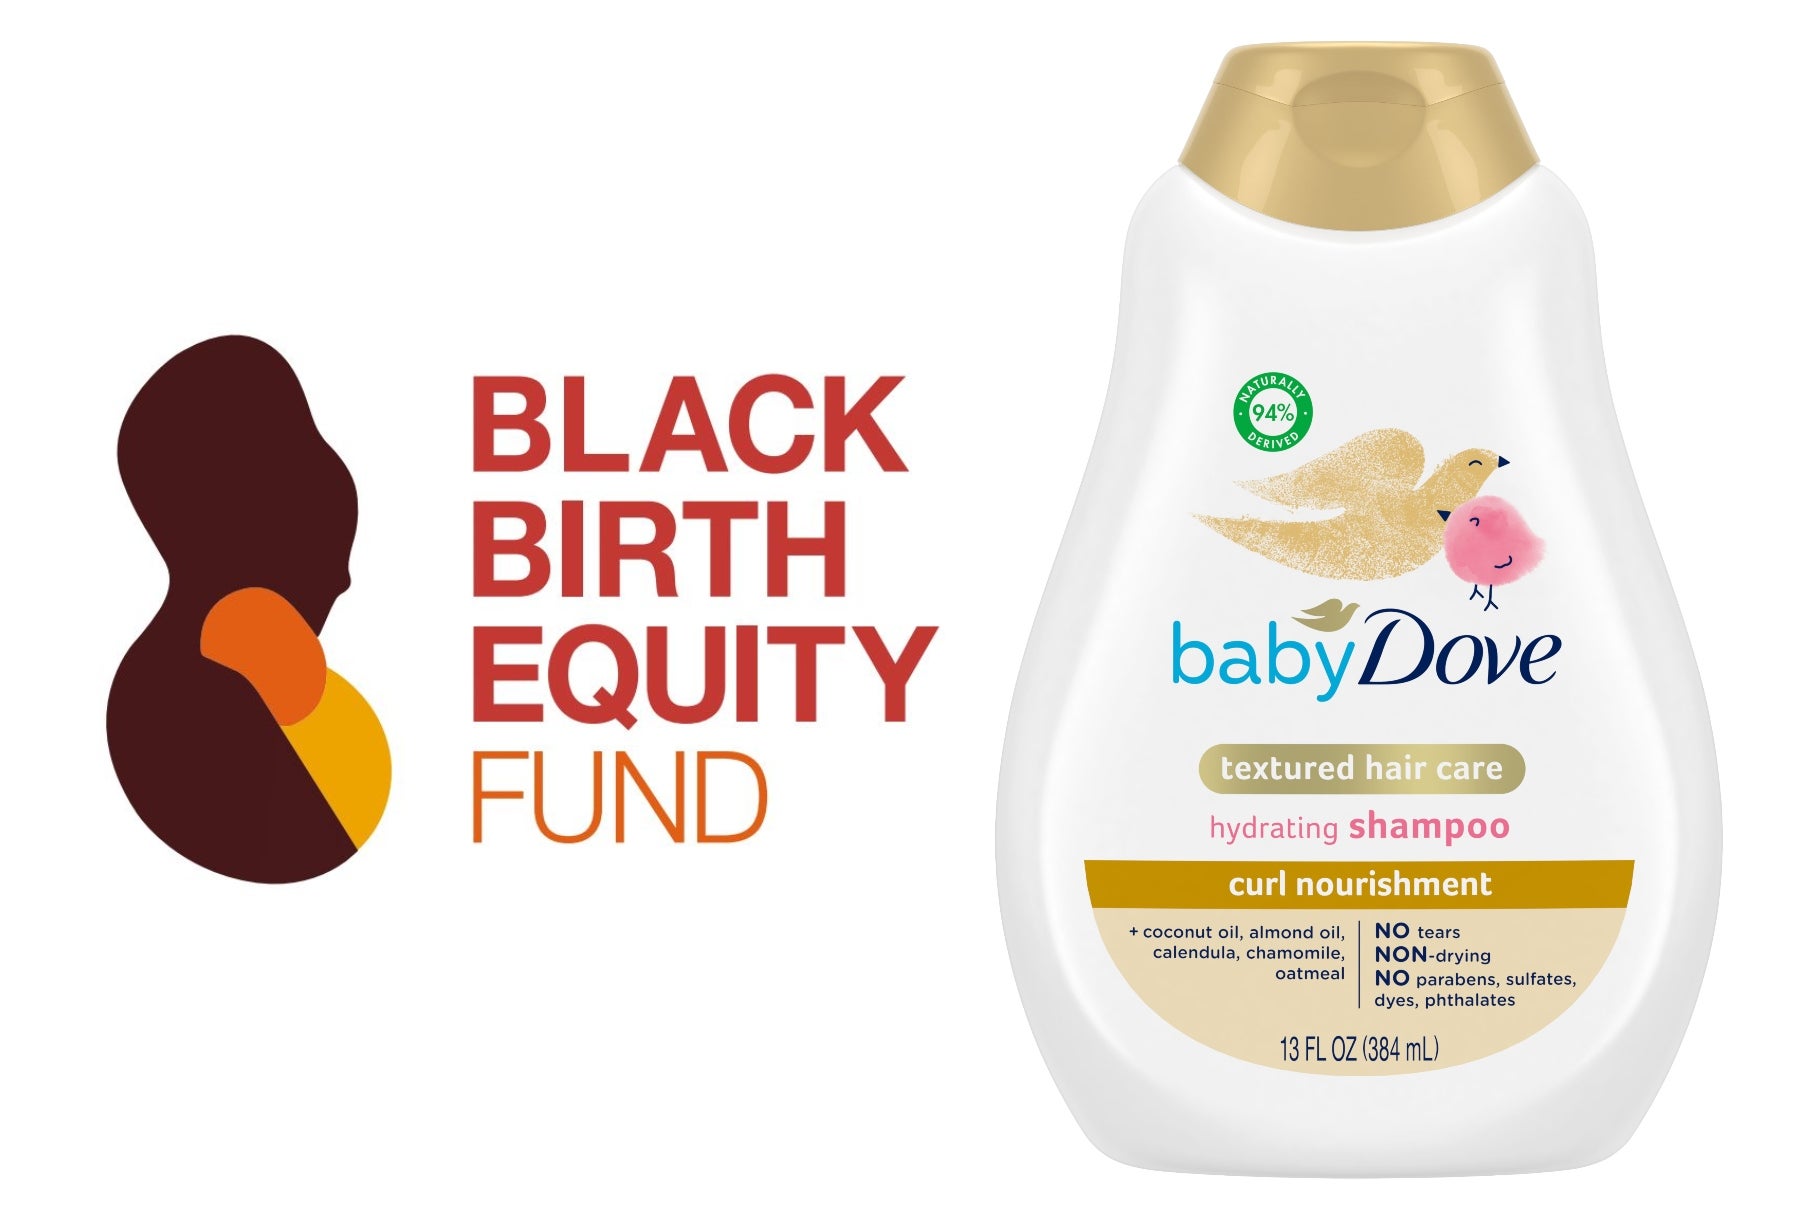 Baby Dove Launches Black Birth Equity Fund To Protect Expectant Moms,  Melanin-Rich Line To Protect Black Babies